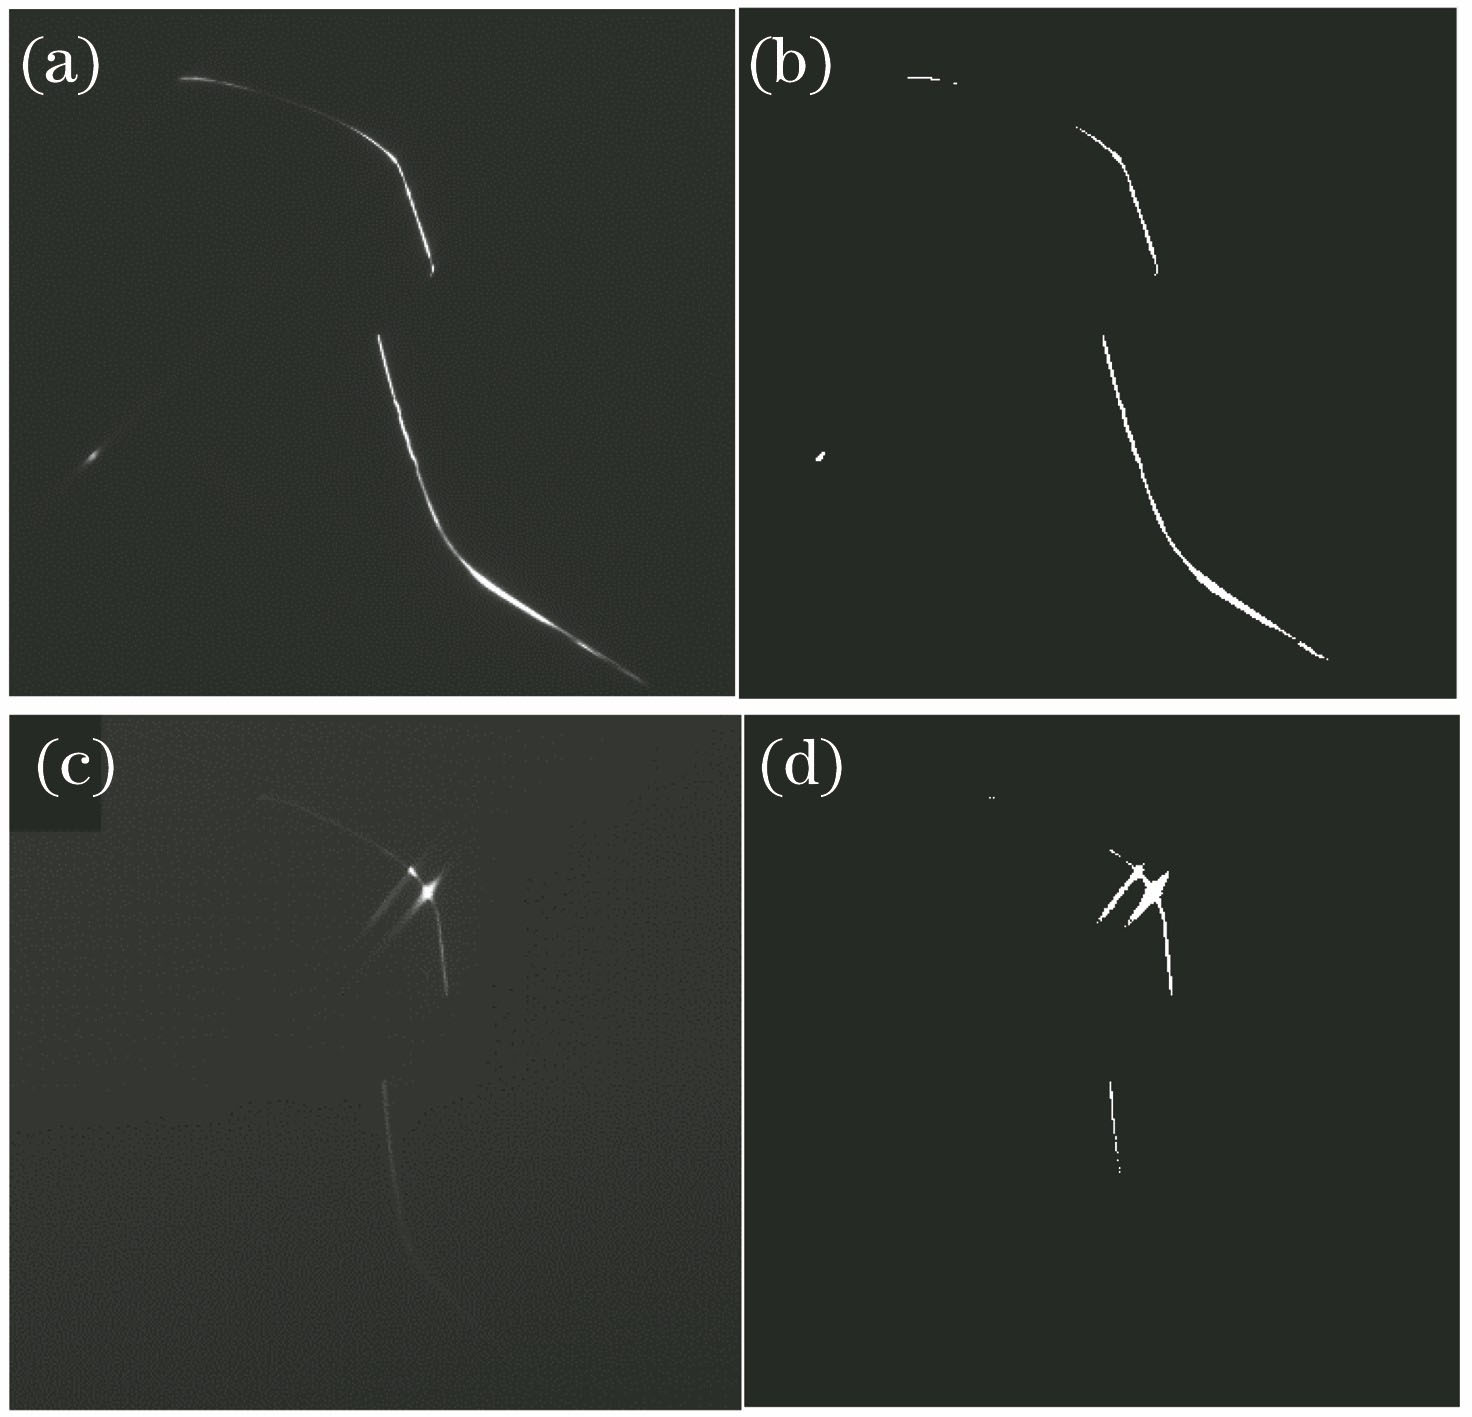 Effect of mirror reflection on stripe extraction. (a) Mirror reflection at headband; (b) binarization result of Fig. 2(a); (c) mirror reflection on polished rail; (d) binarization result of Fig. 2(c)